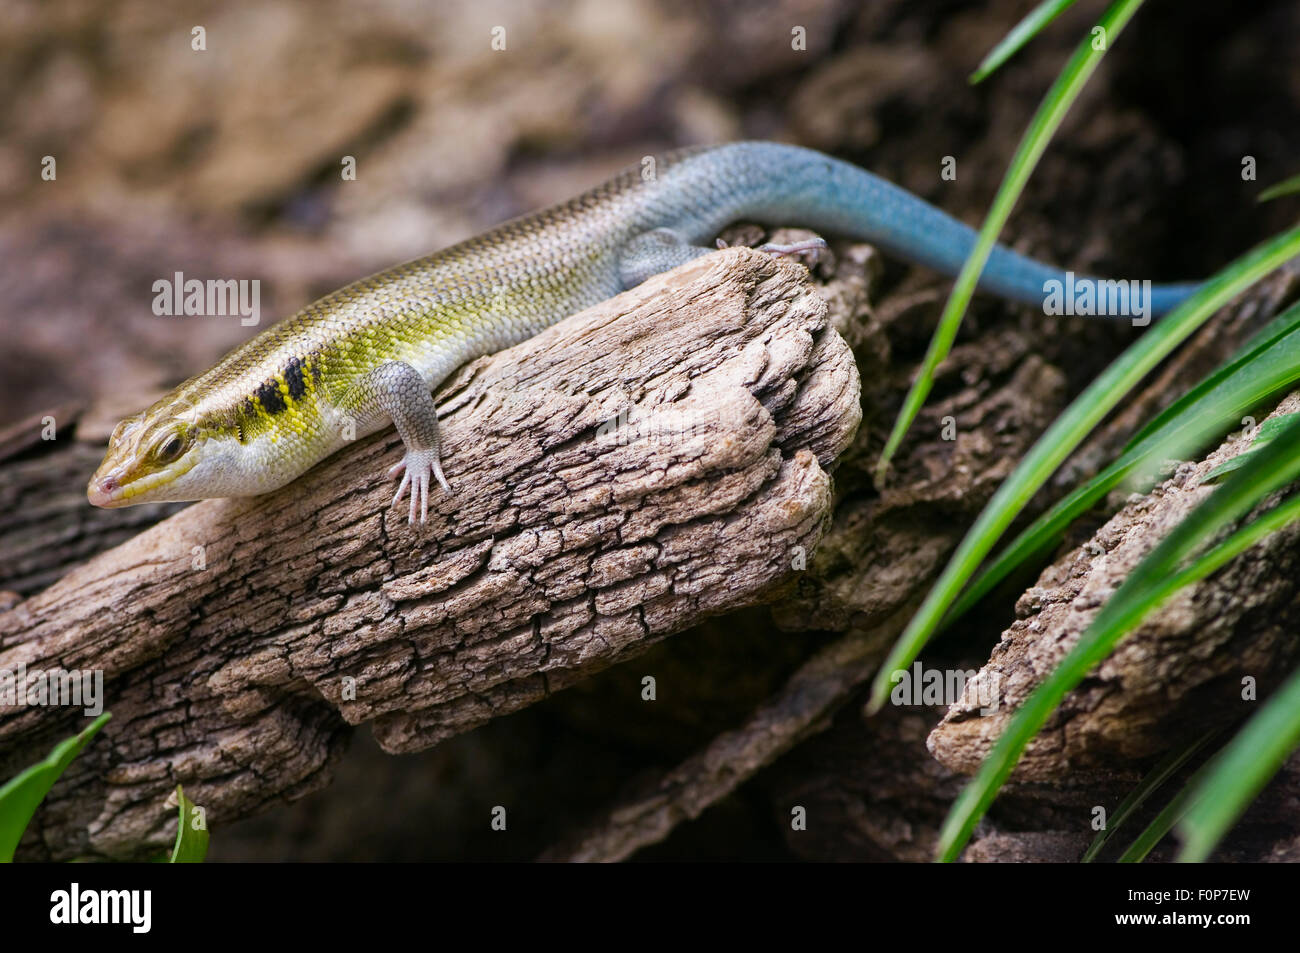 side full body view of a blue tailed skinks on a dry branch sitting in diffuse natural light Stock Photo